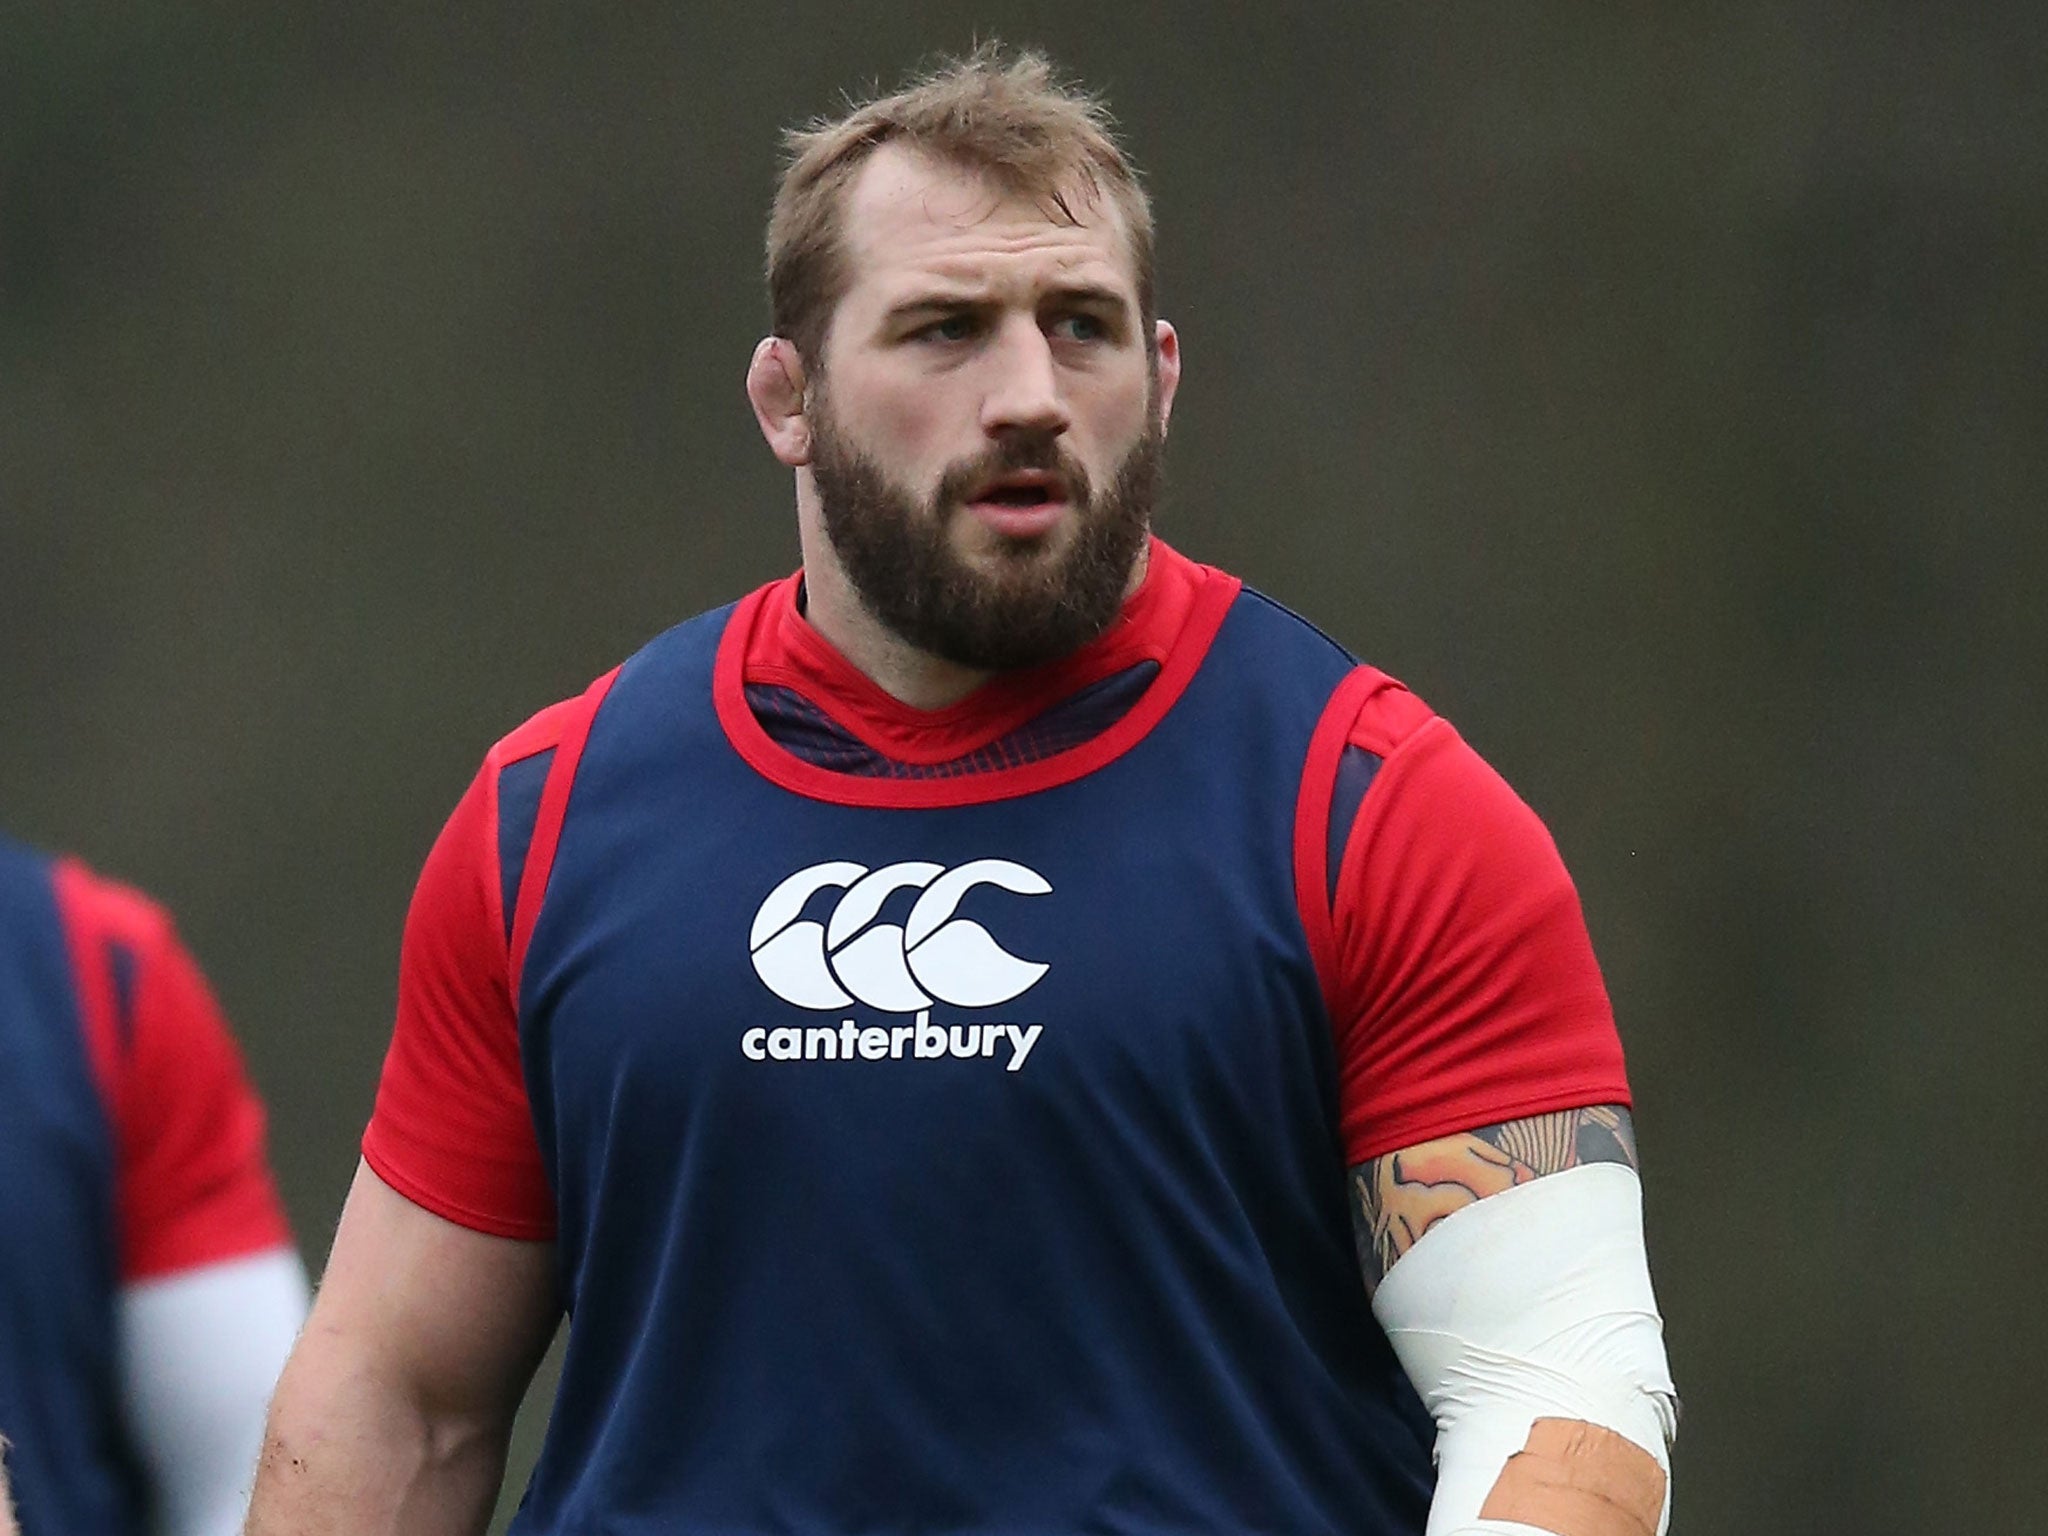 Joe Marler has been replaced by Mako Vunipola in the England side to face France